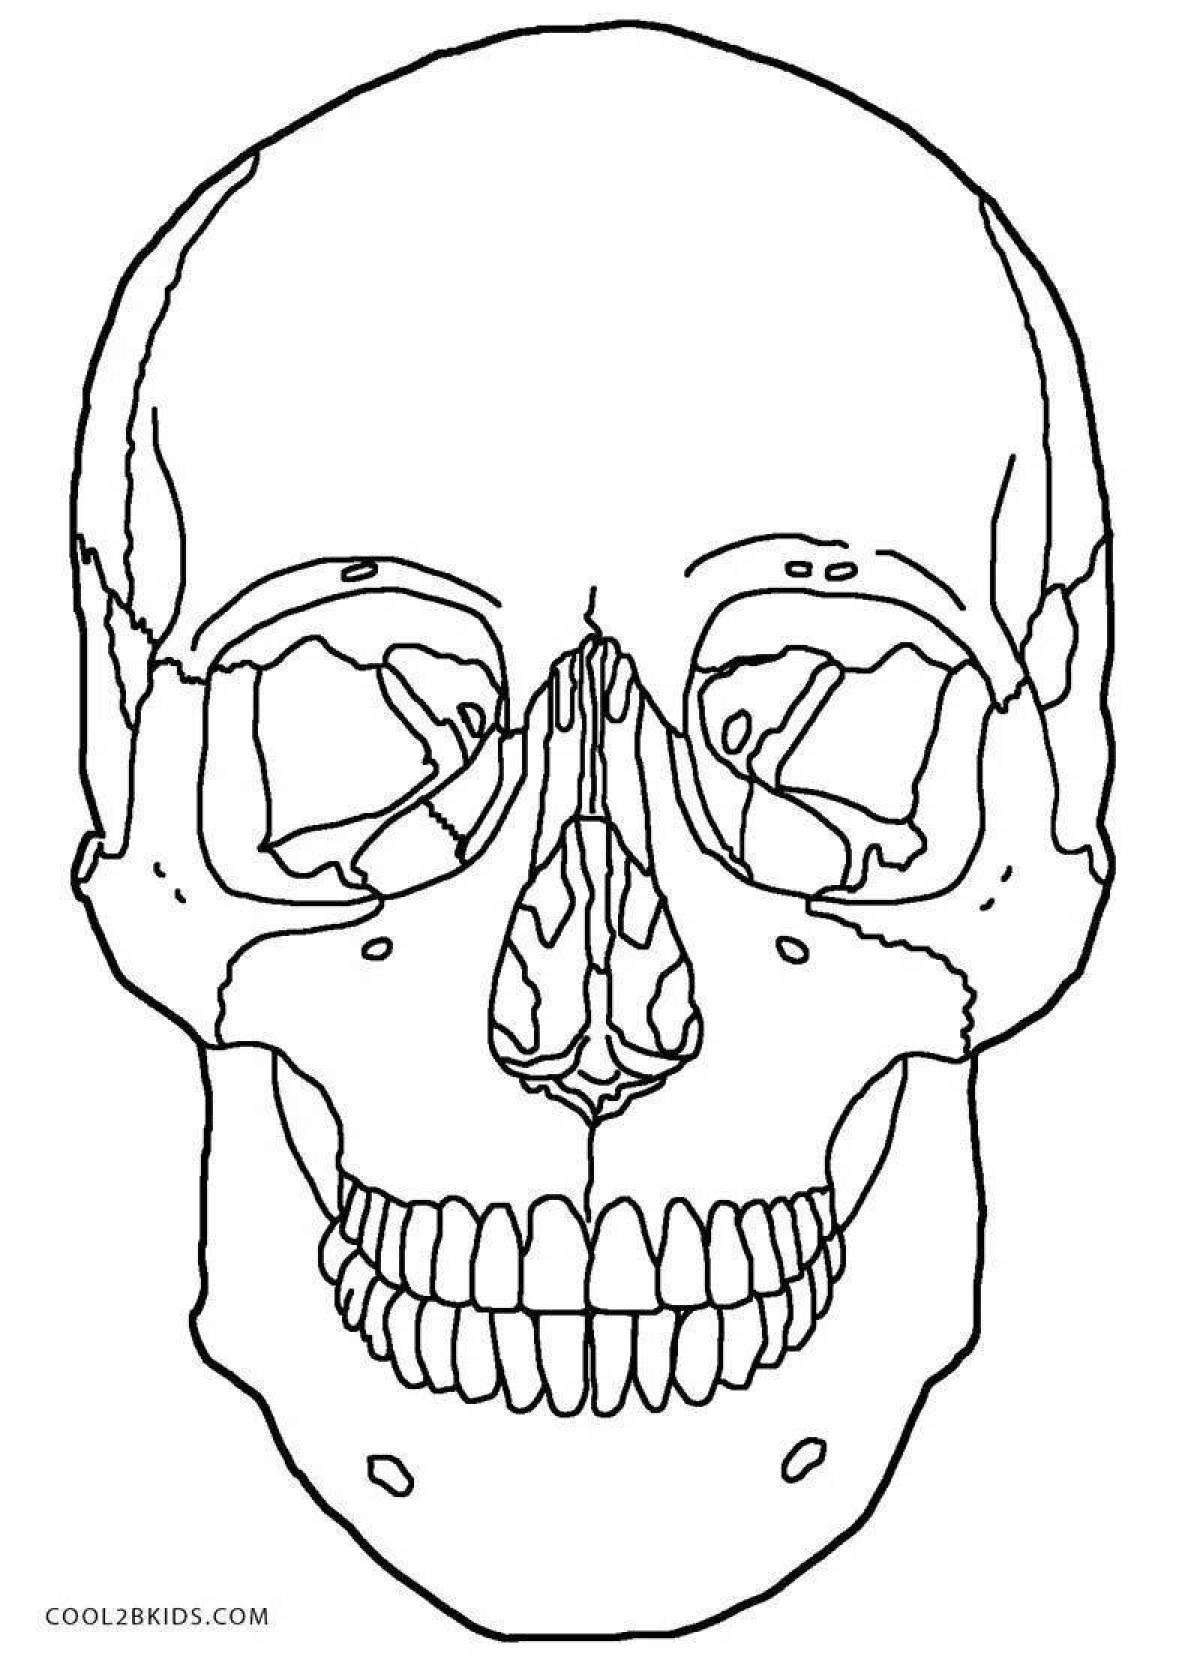 Awesome anatomy coloring page